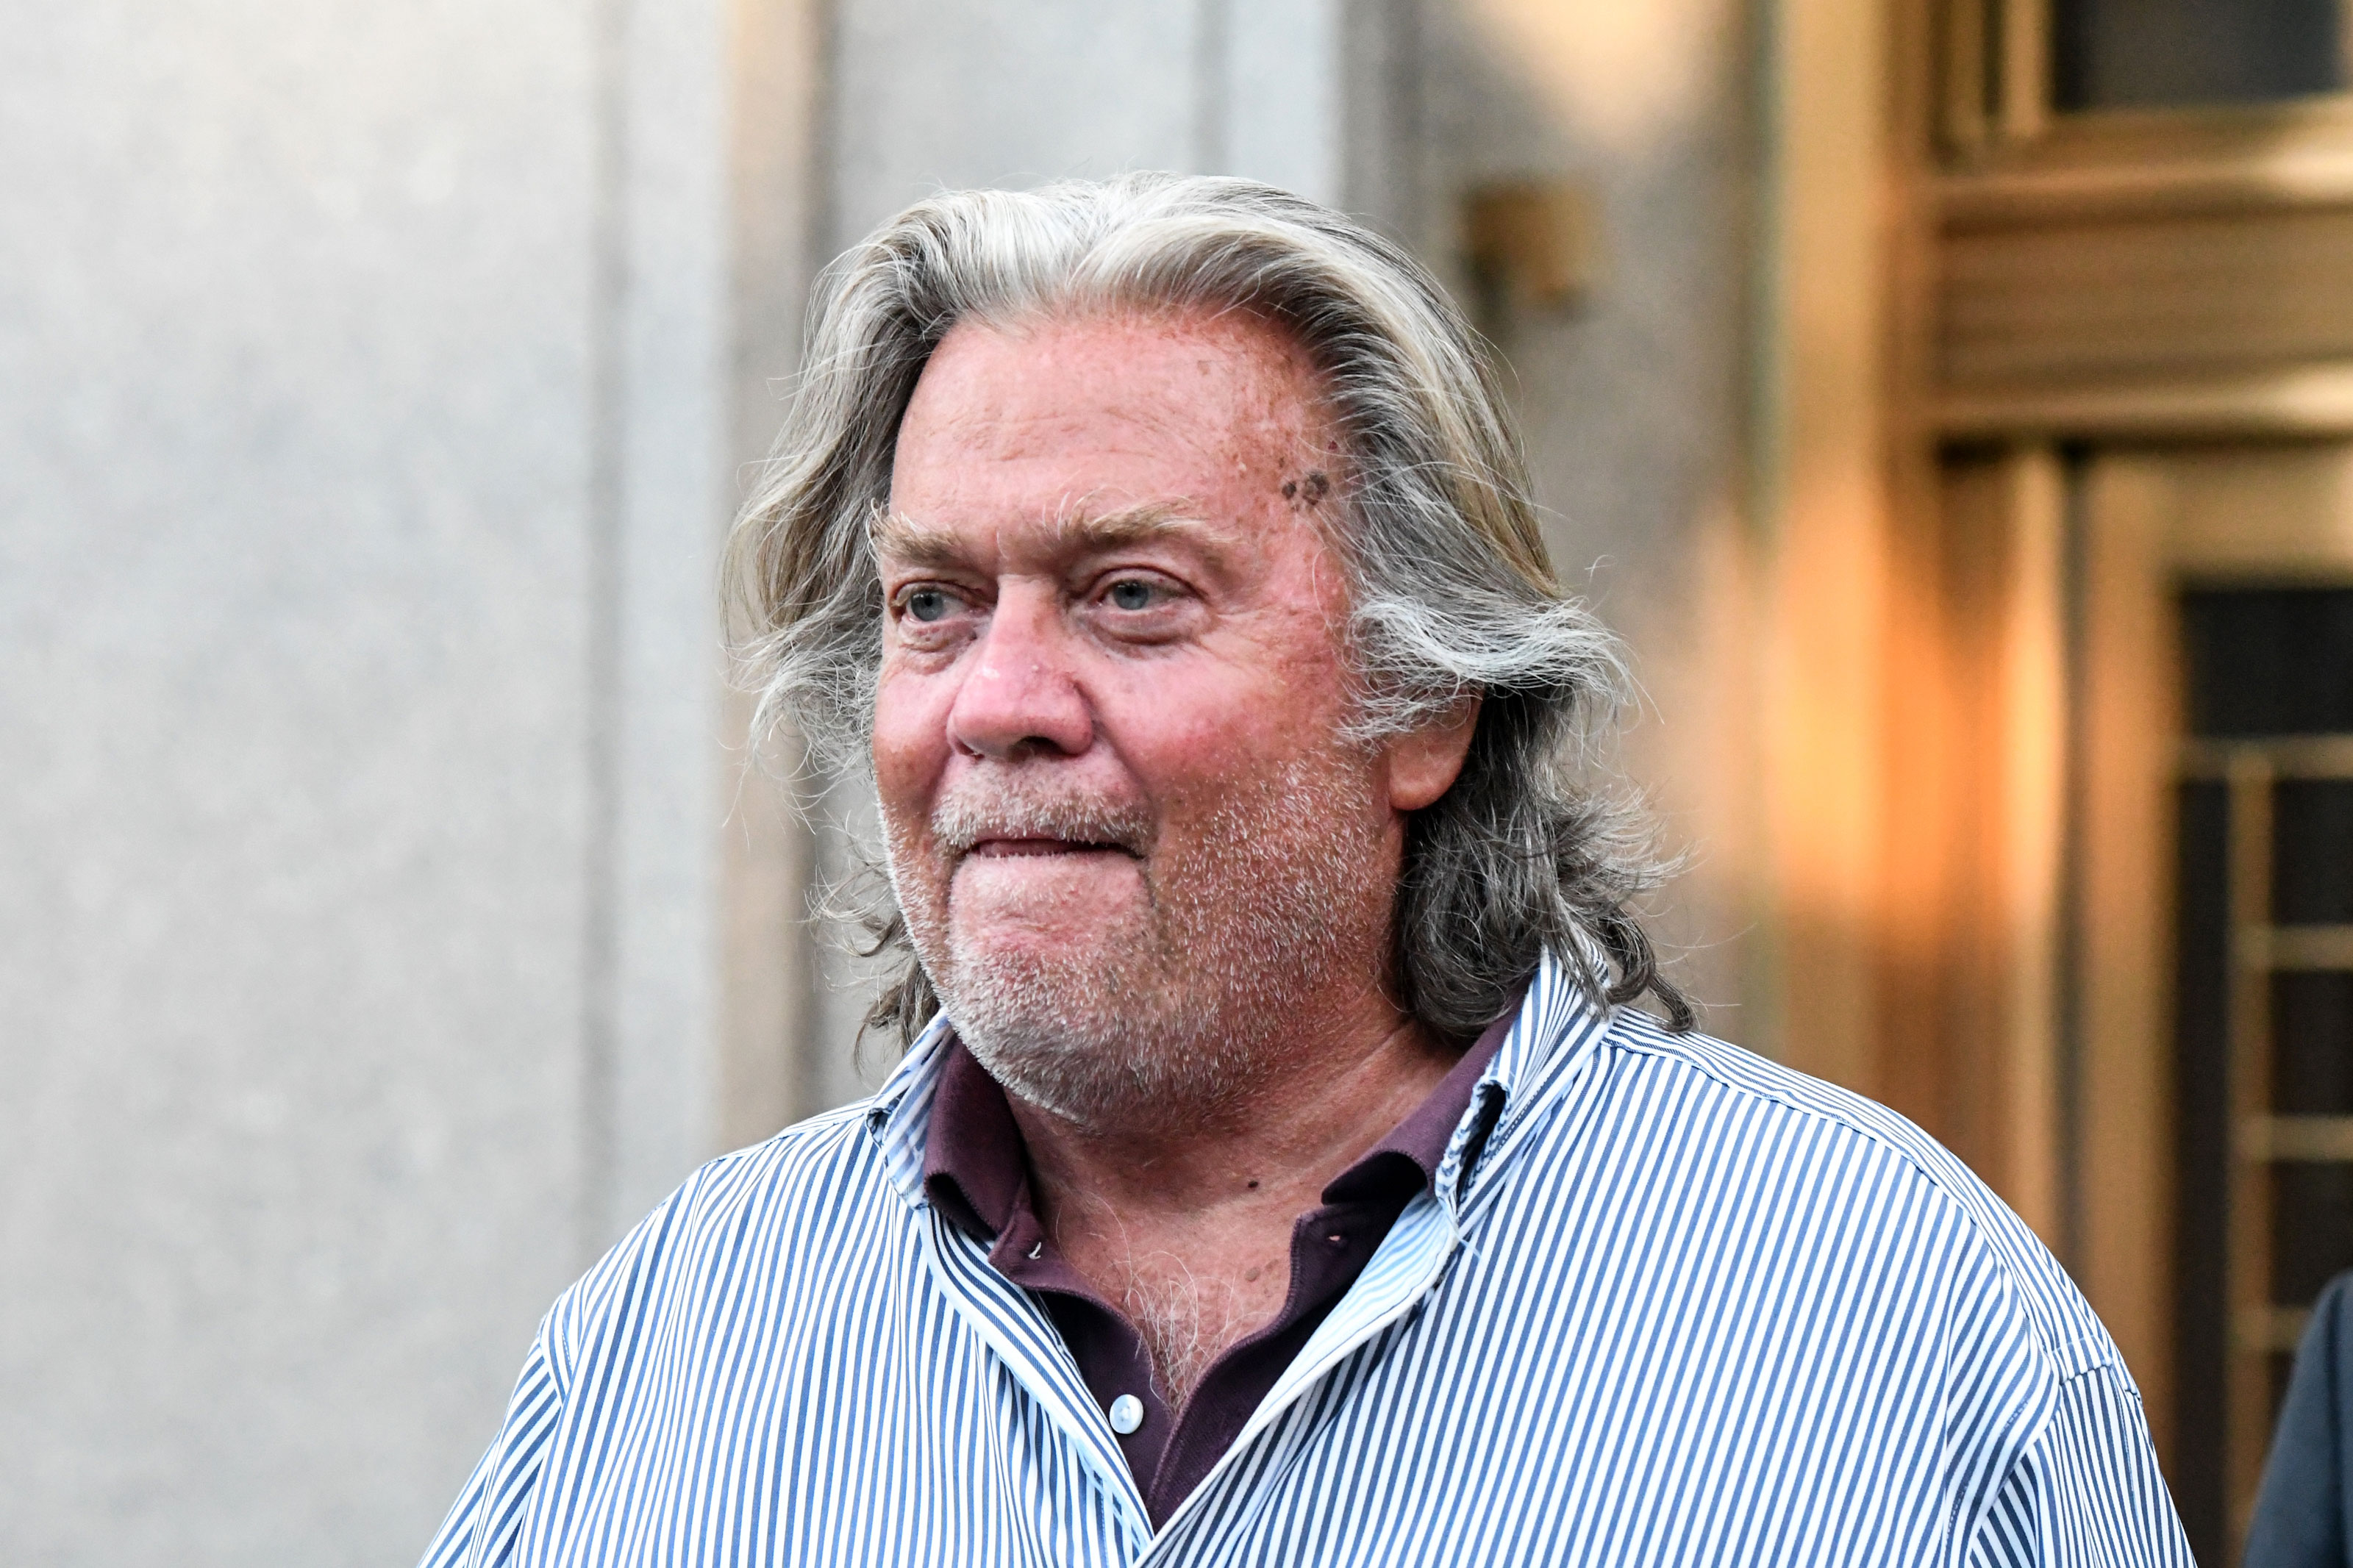 Steve Bannon, former White House chief strategist, exits the Manhattan Federal Court in New York on August 20, 2020.